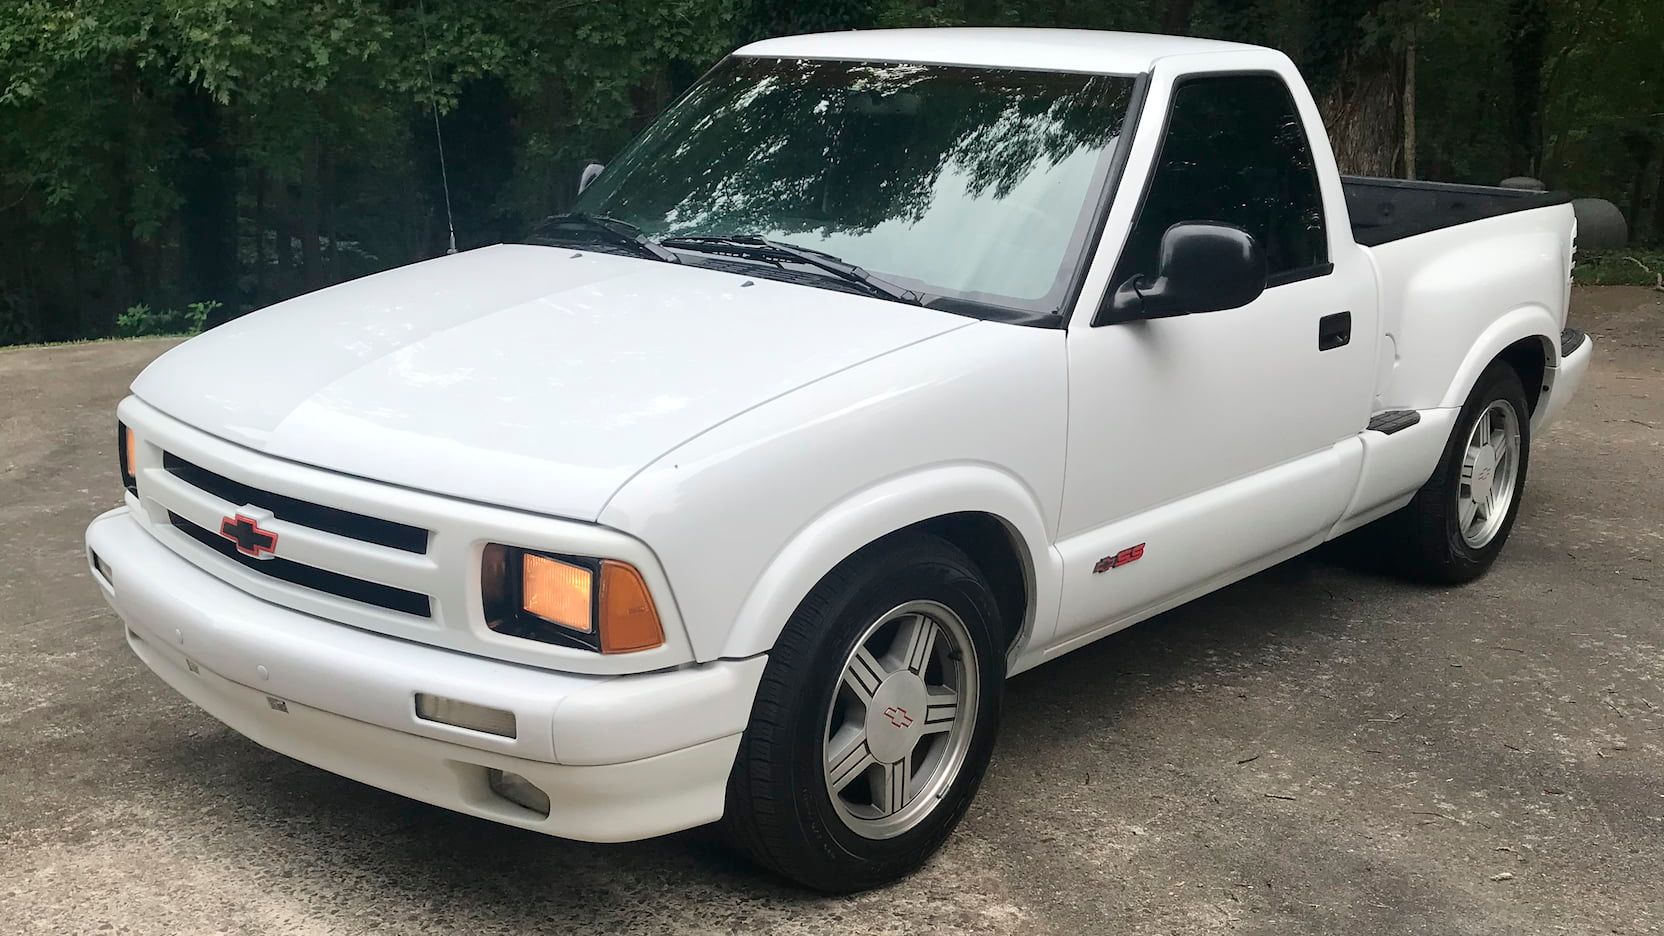 A parked 1997 Chevy S-10 SS